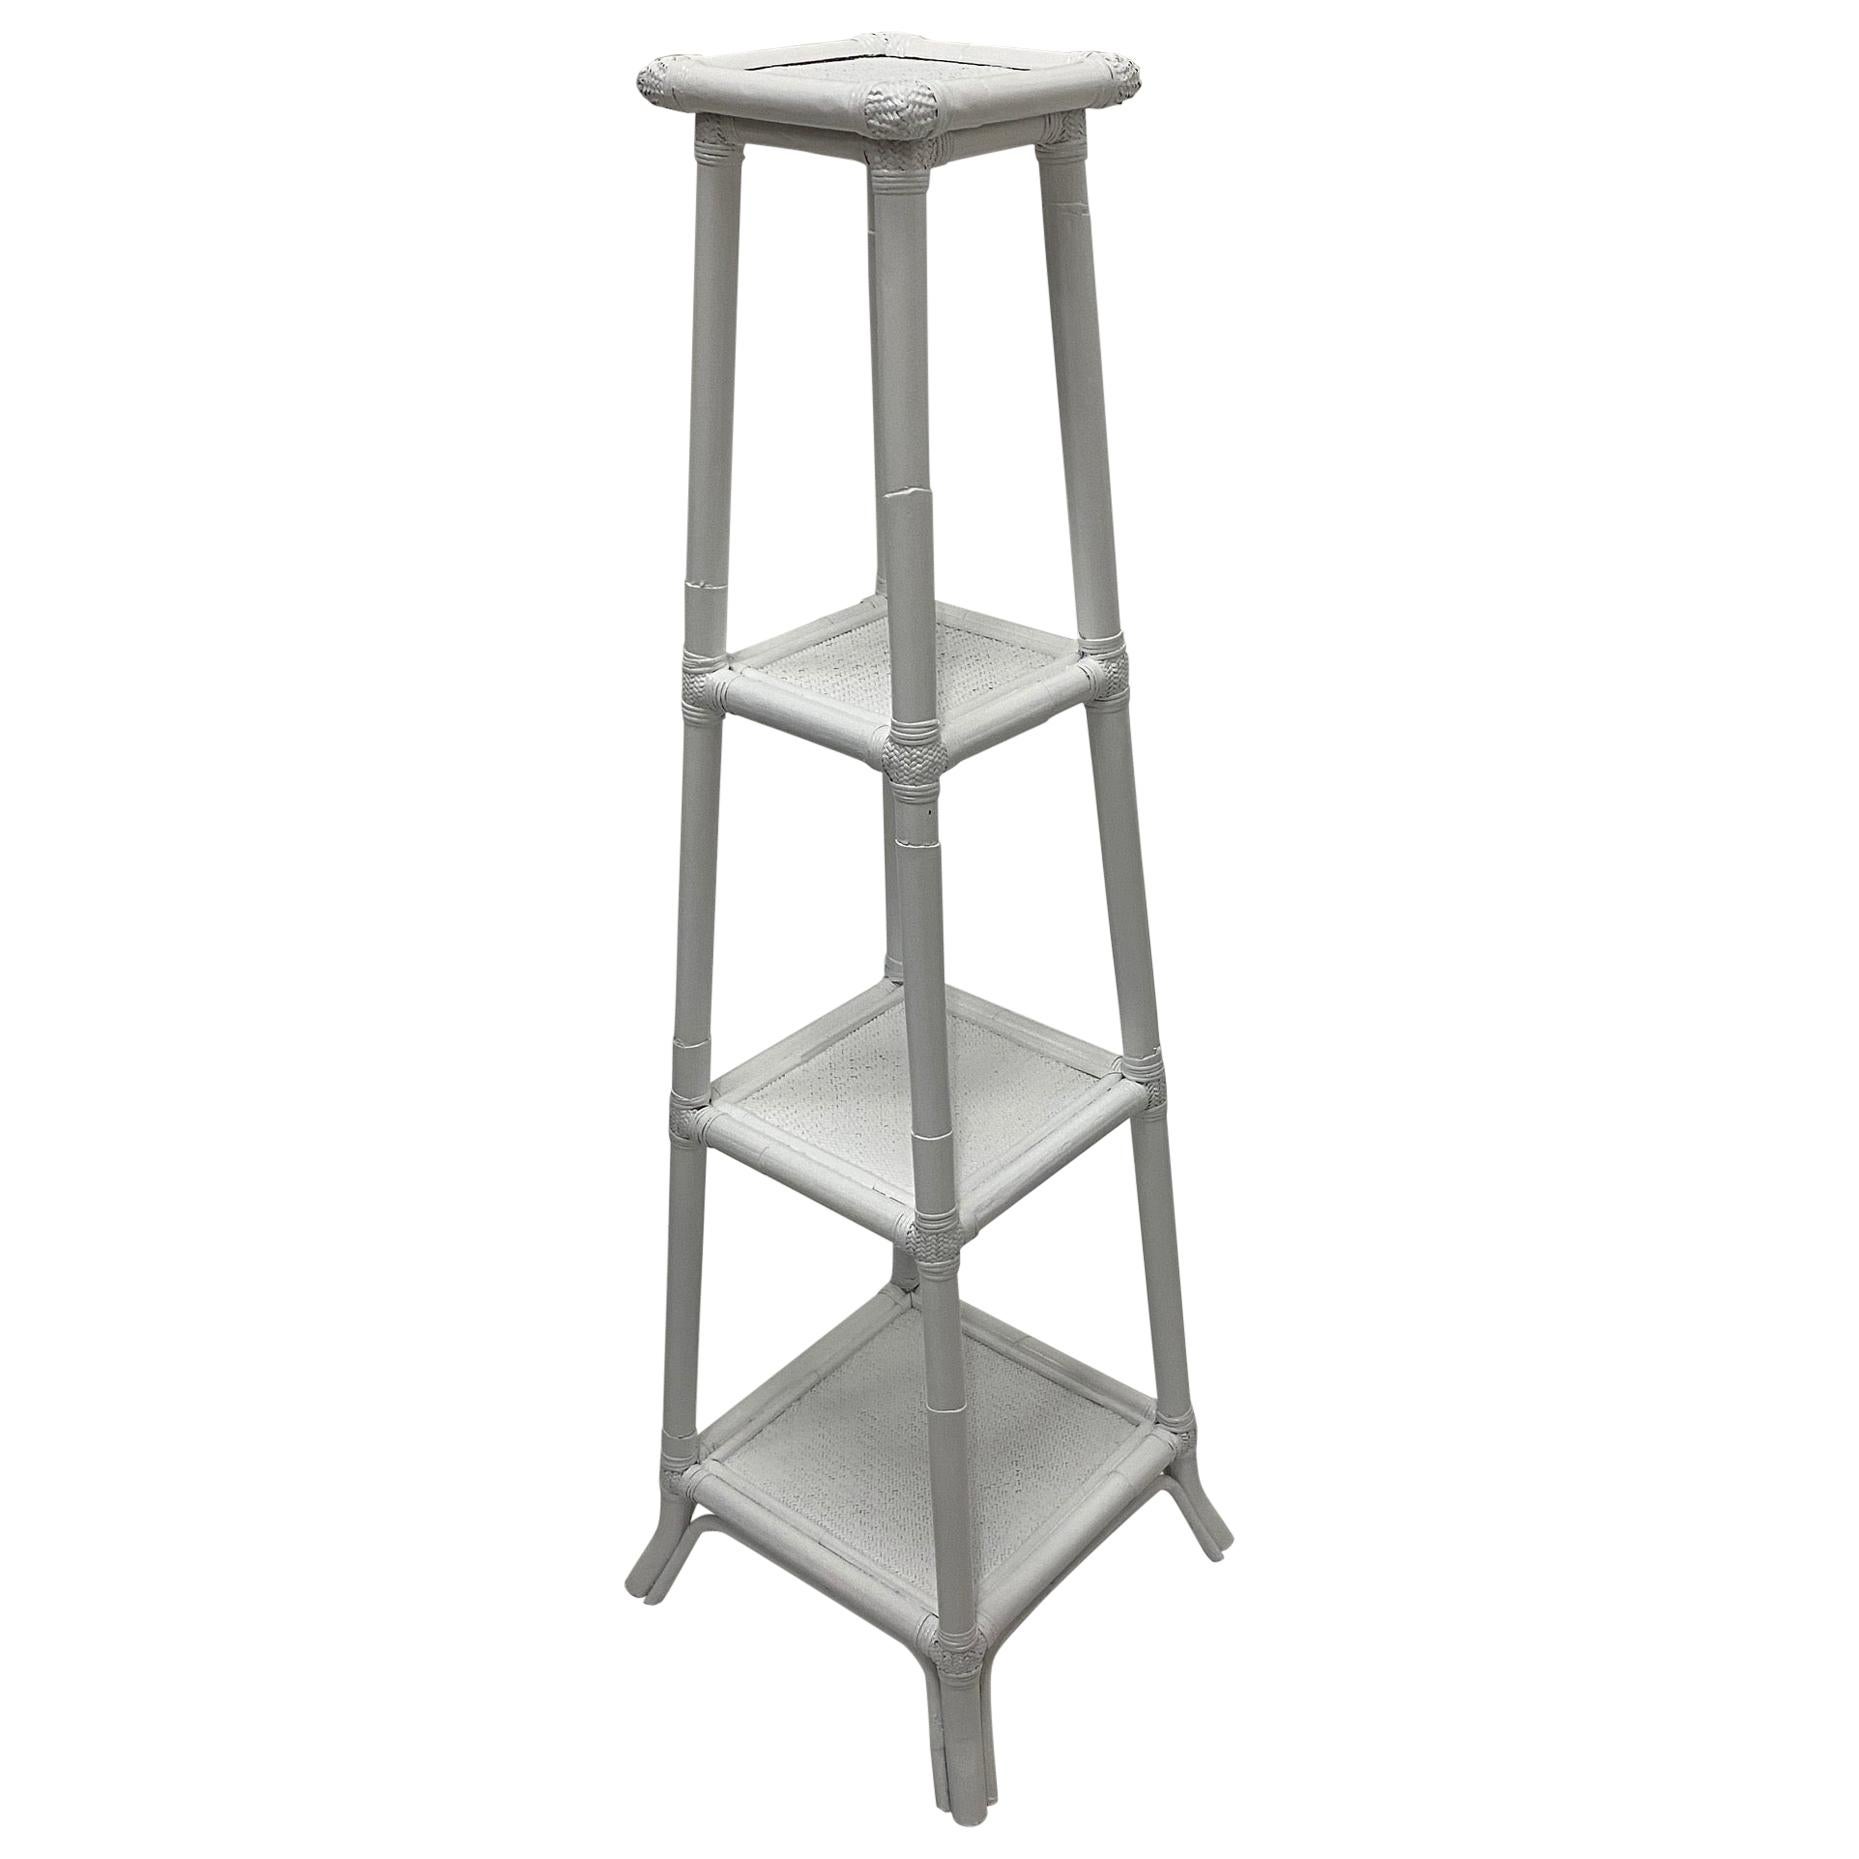 Versatile White Wicker 4 Tiered Stand or Etagere Shelves For Sale